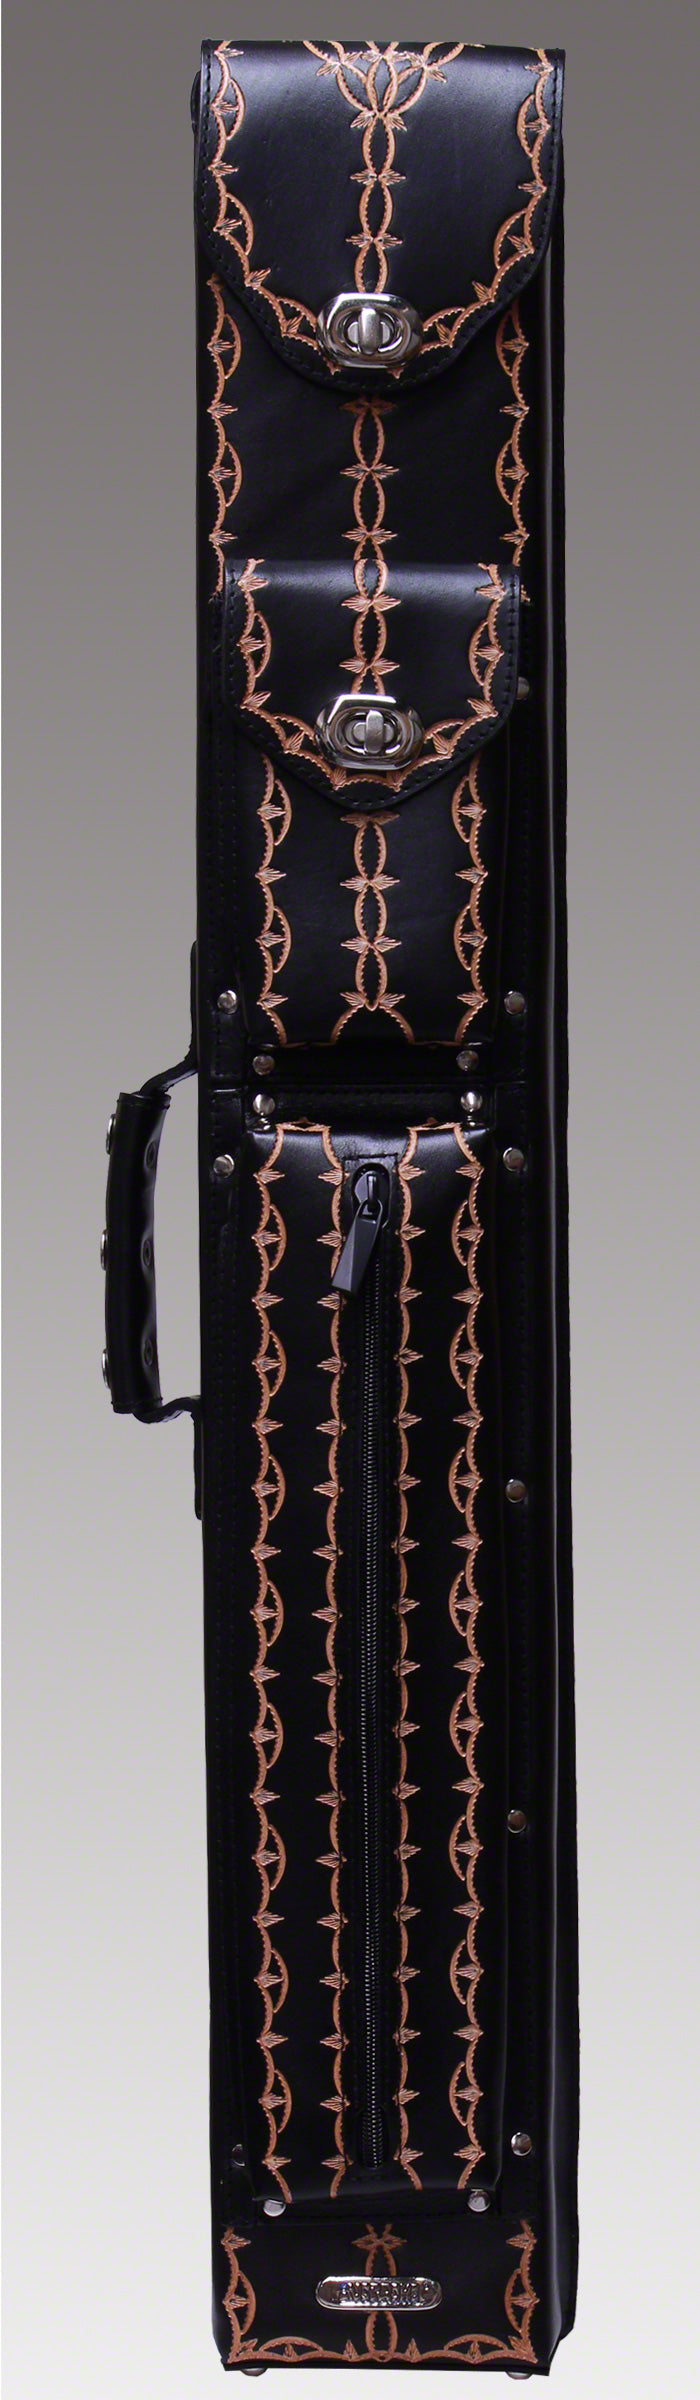 Instroke 2x4 FIT-A Black Hand Tooled Pool Cue Case